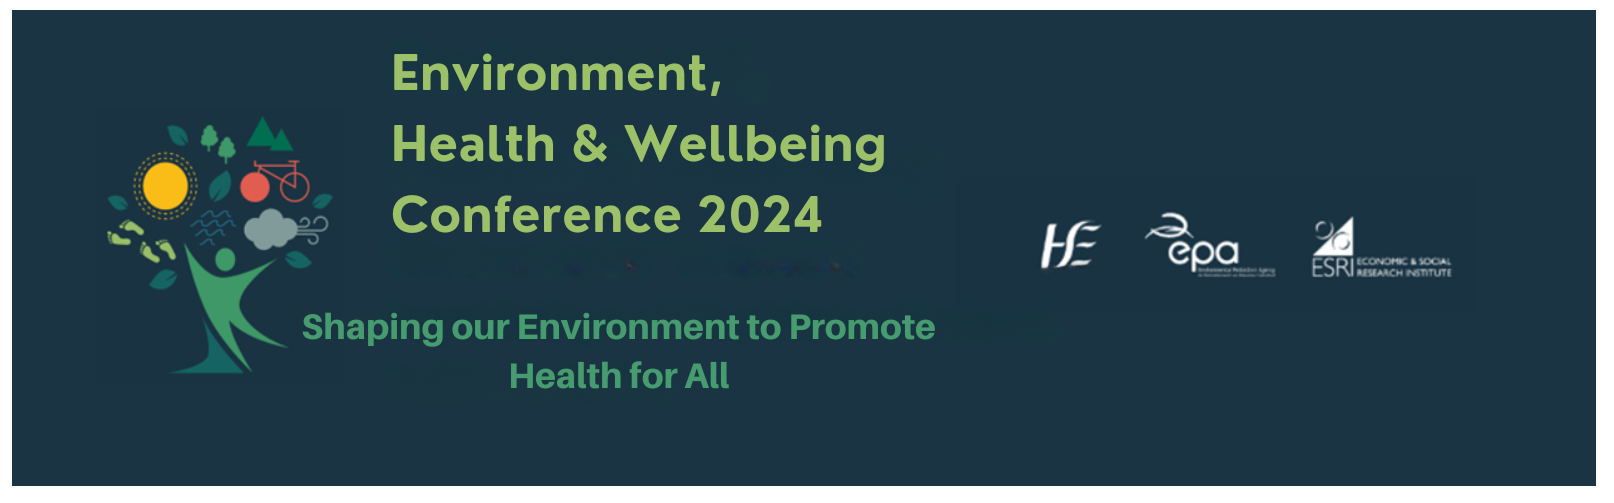 Environment Health and Wellbeing Conference 2024 banner decorative